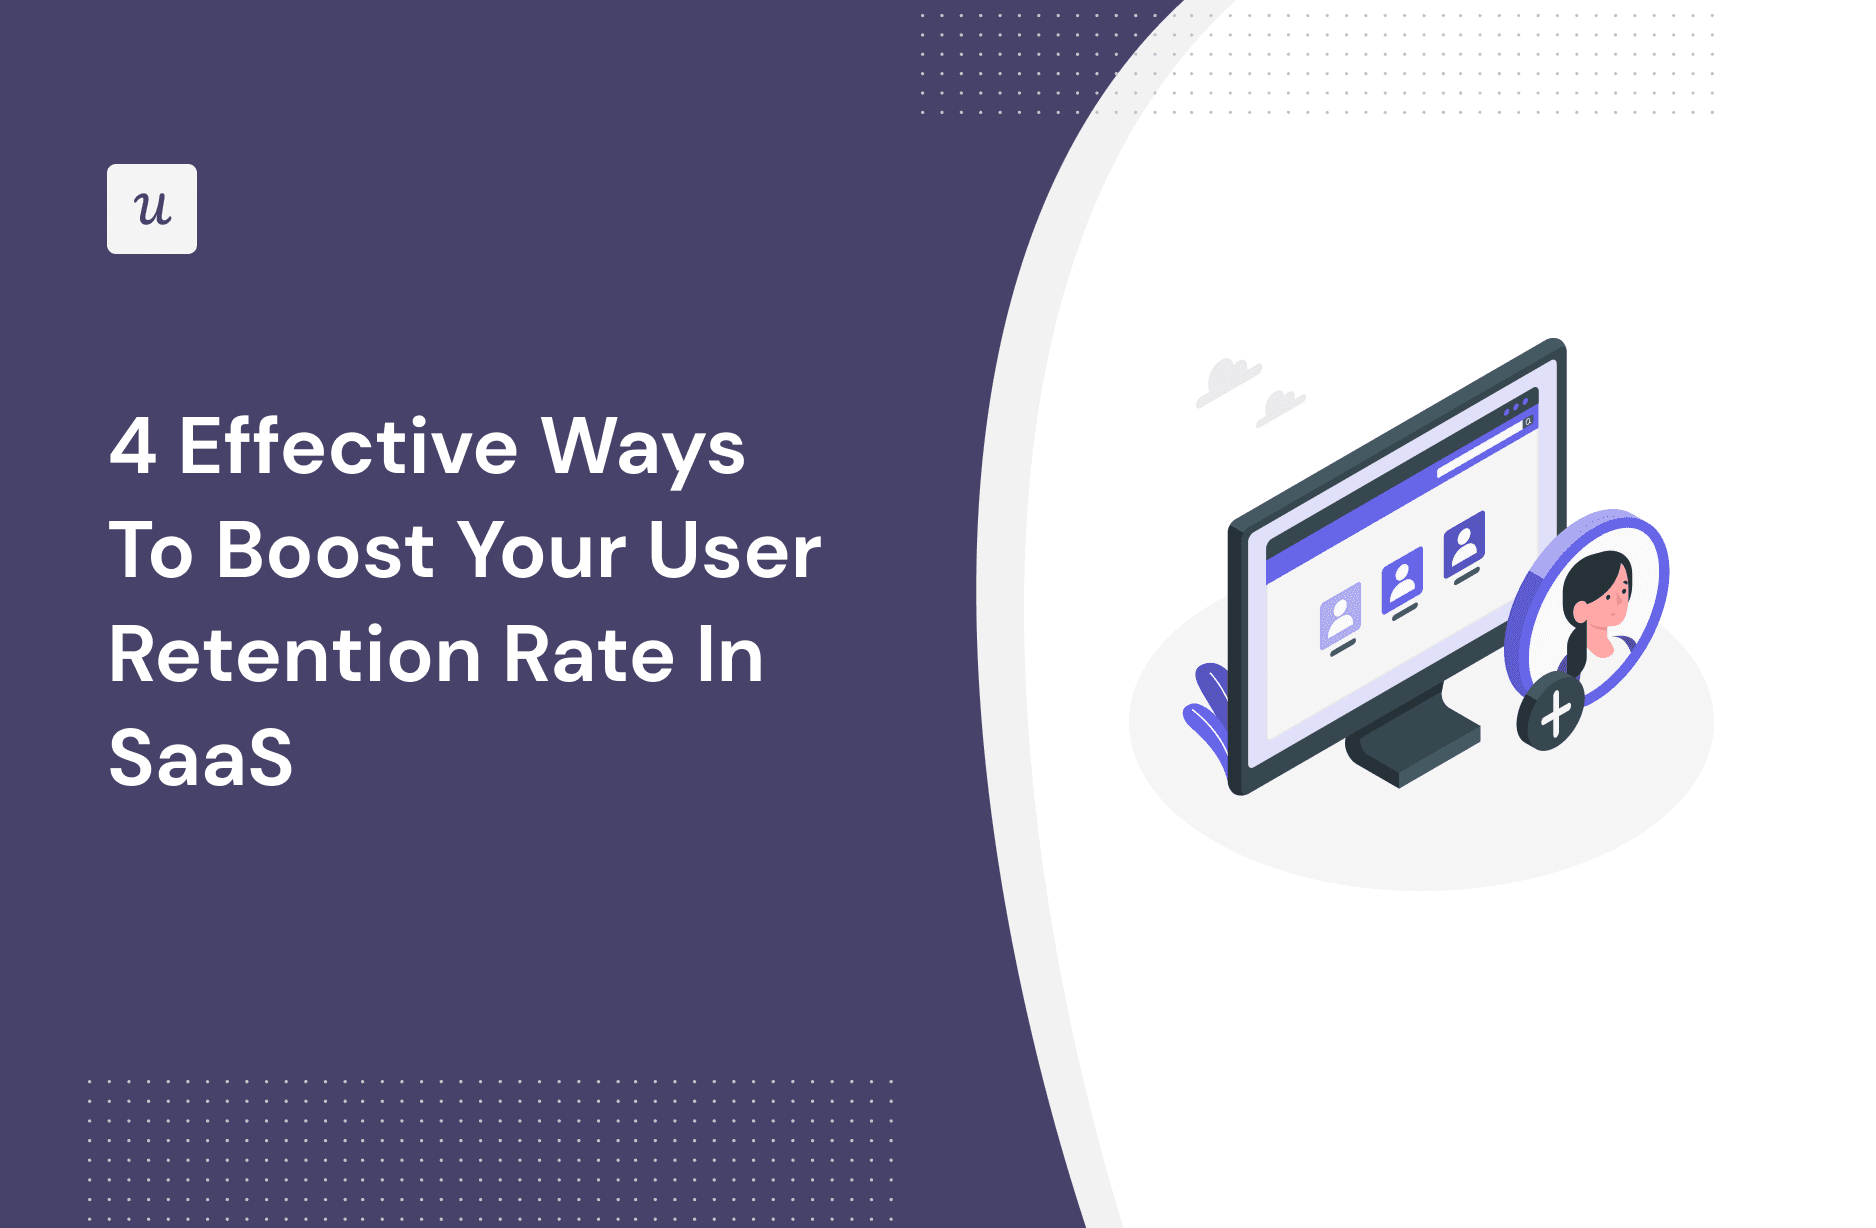 4 Effective Ways To Boost Your User Retention Rate In SaaS cover